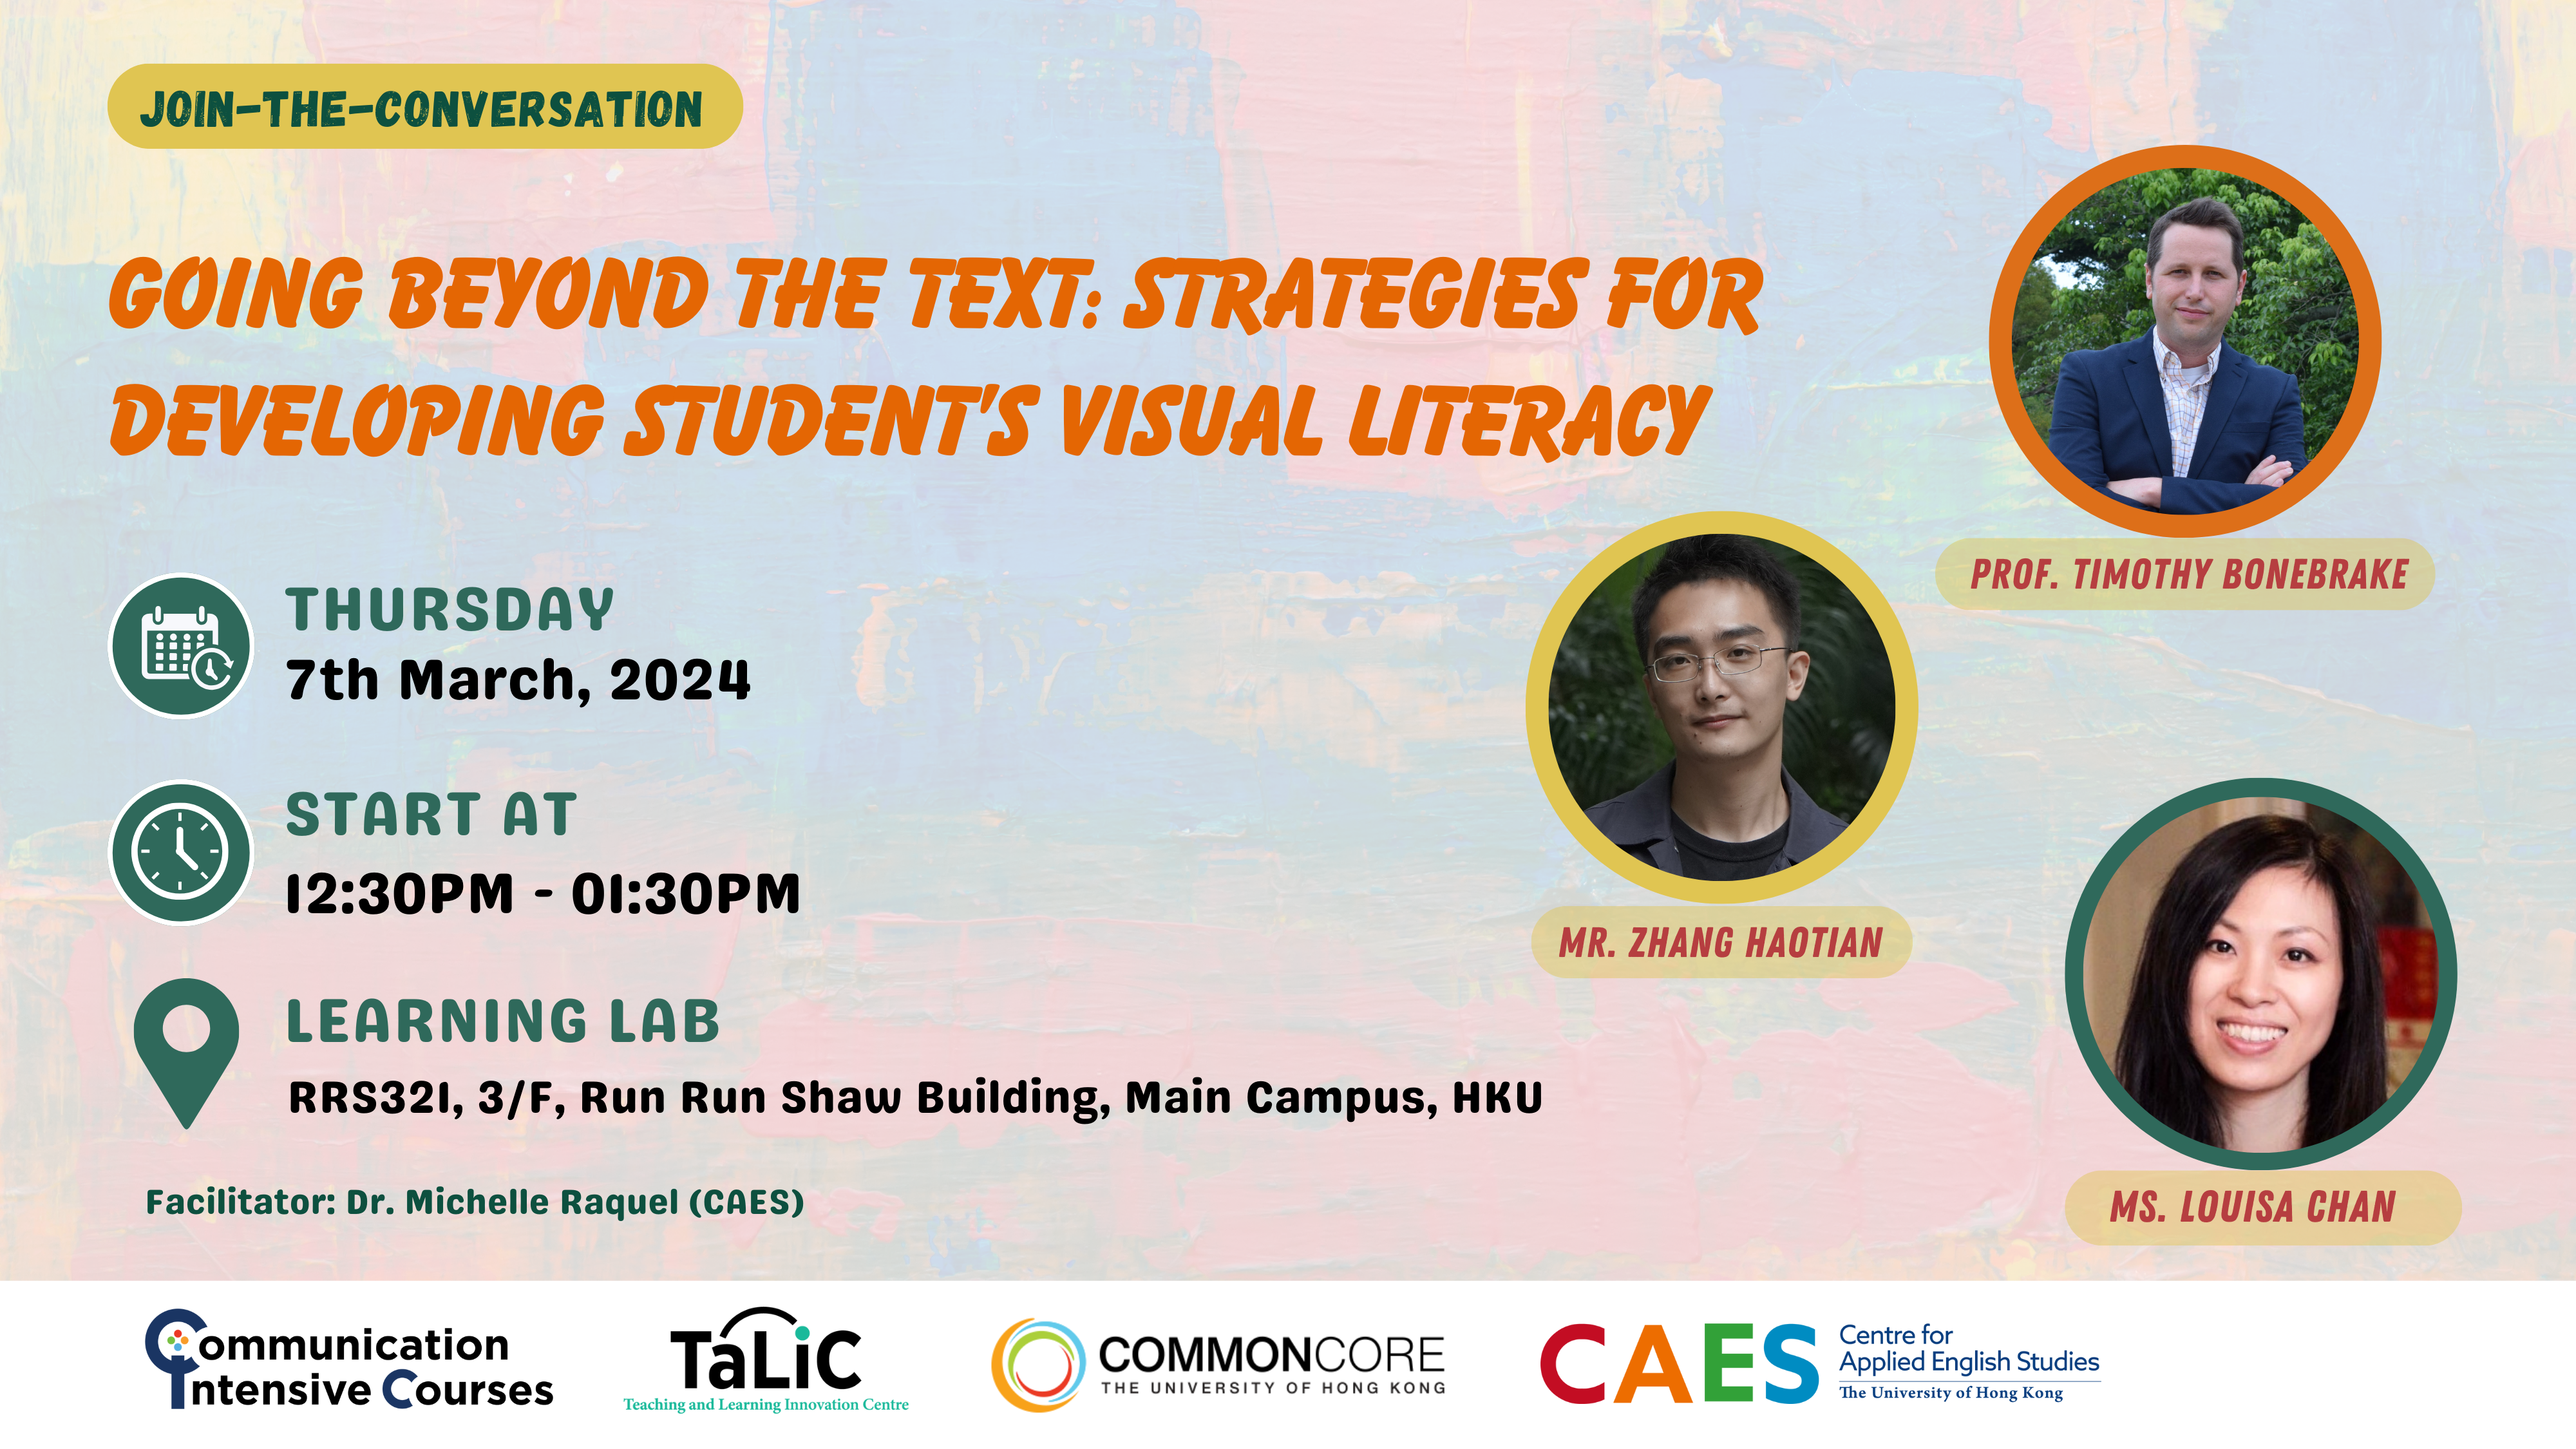 Join-the Conversation: Going beyond the text: Strategies for developing student’s visual literacy